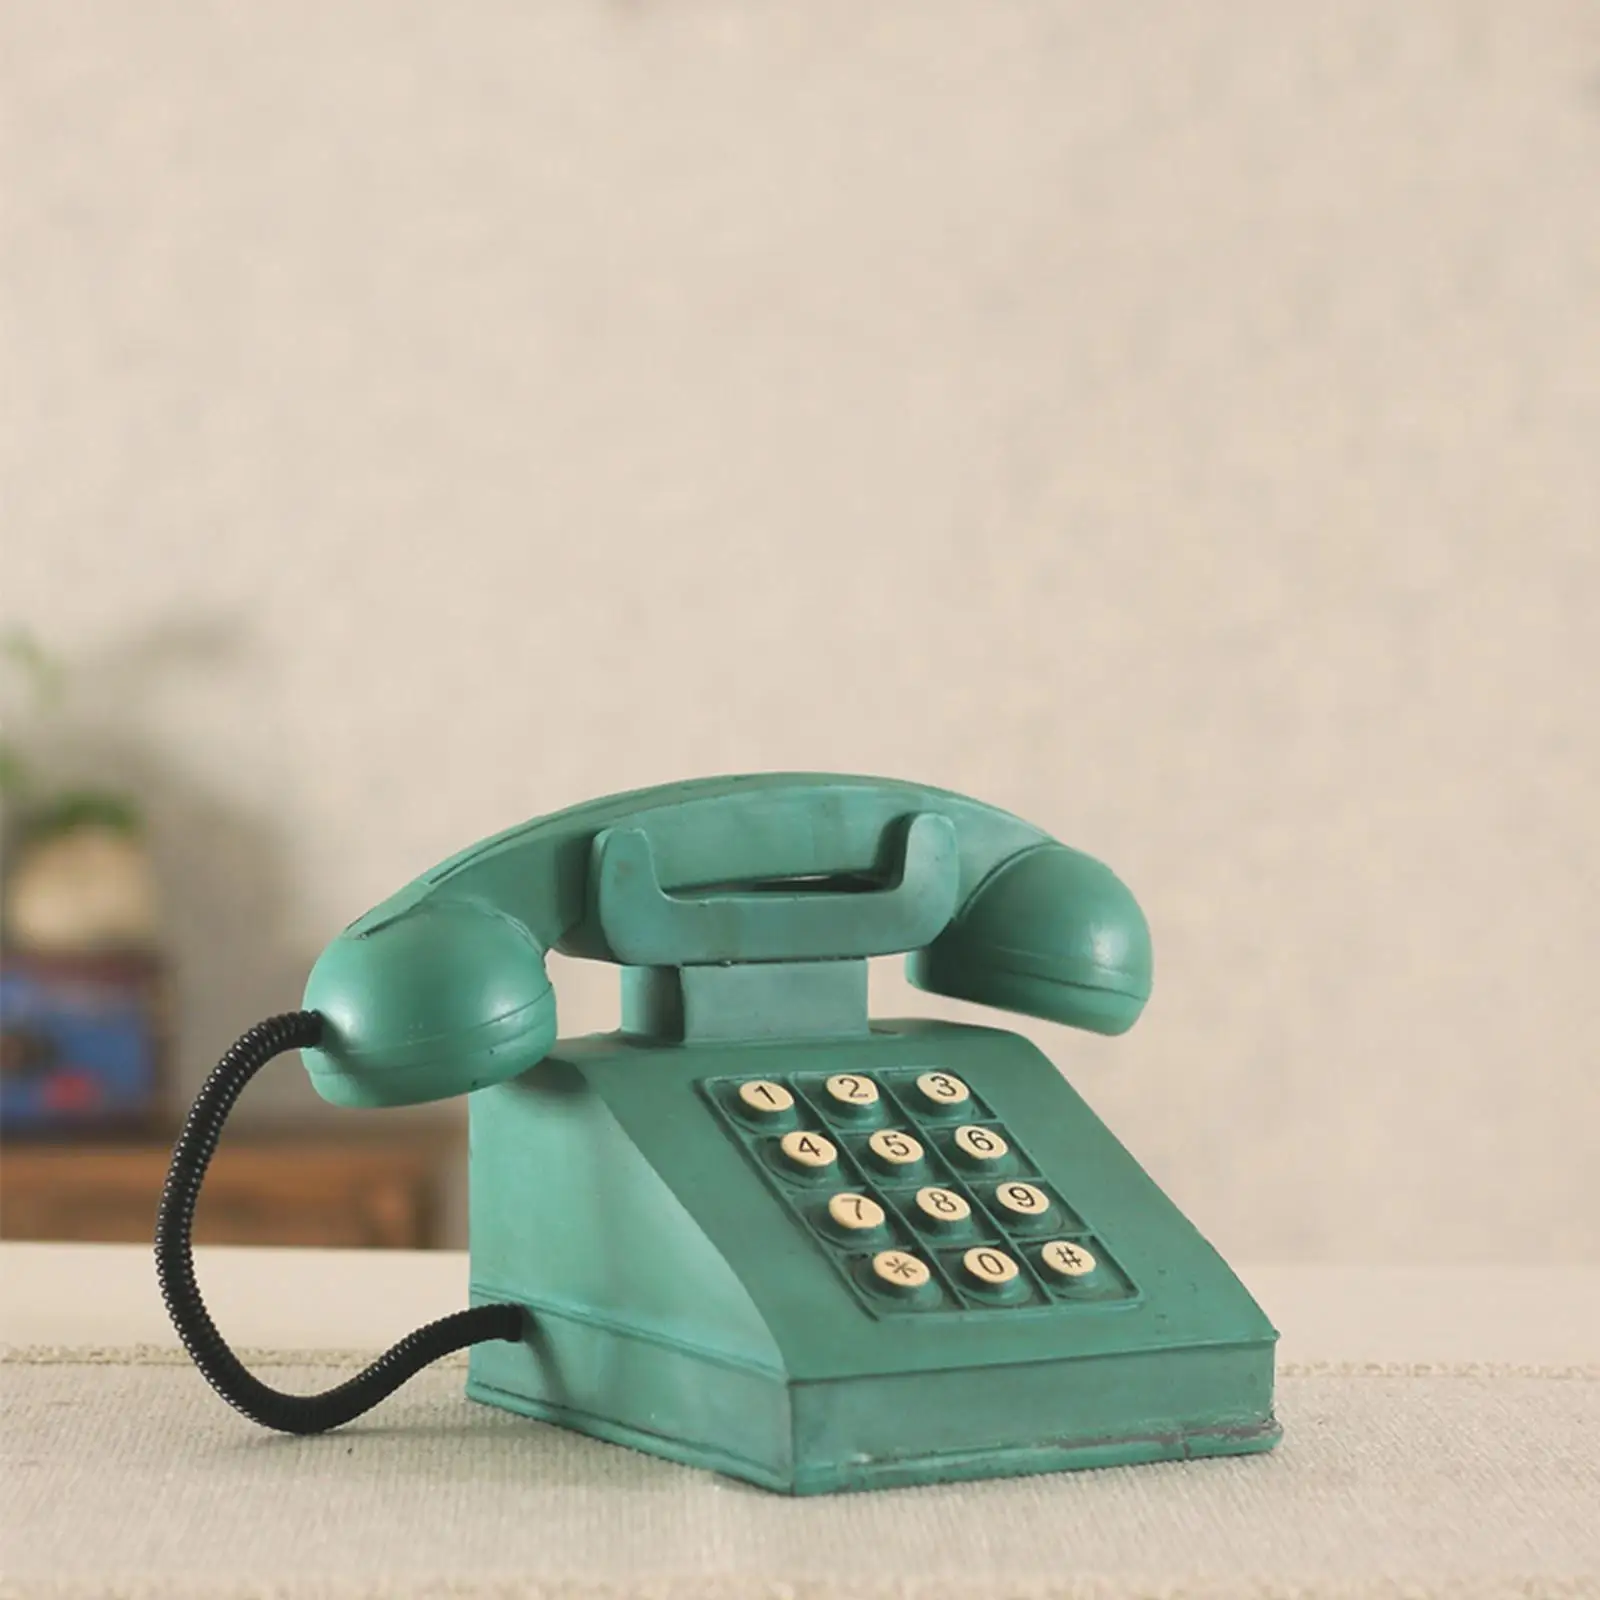 Classic American Telephone Model Statue Resin Craft for Store Room Desktop Home Decor